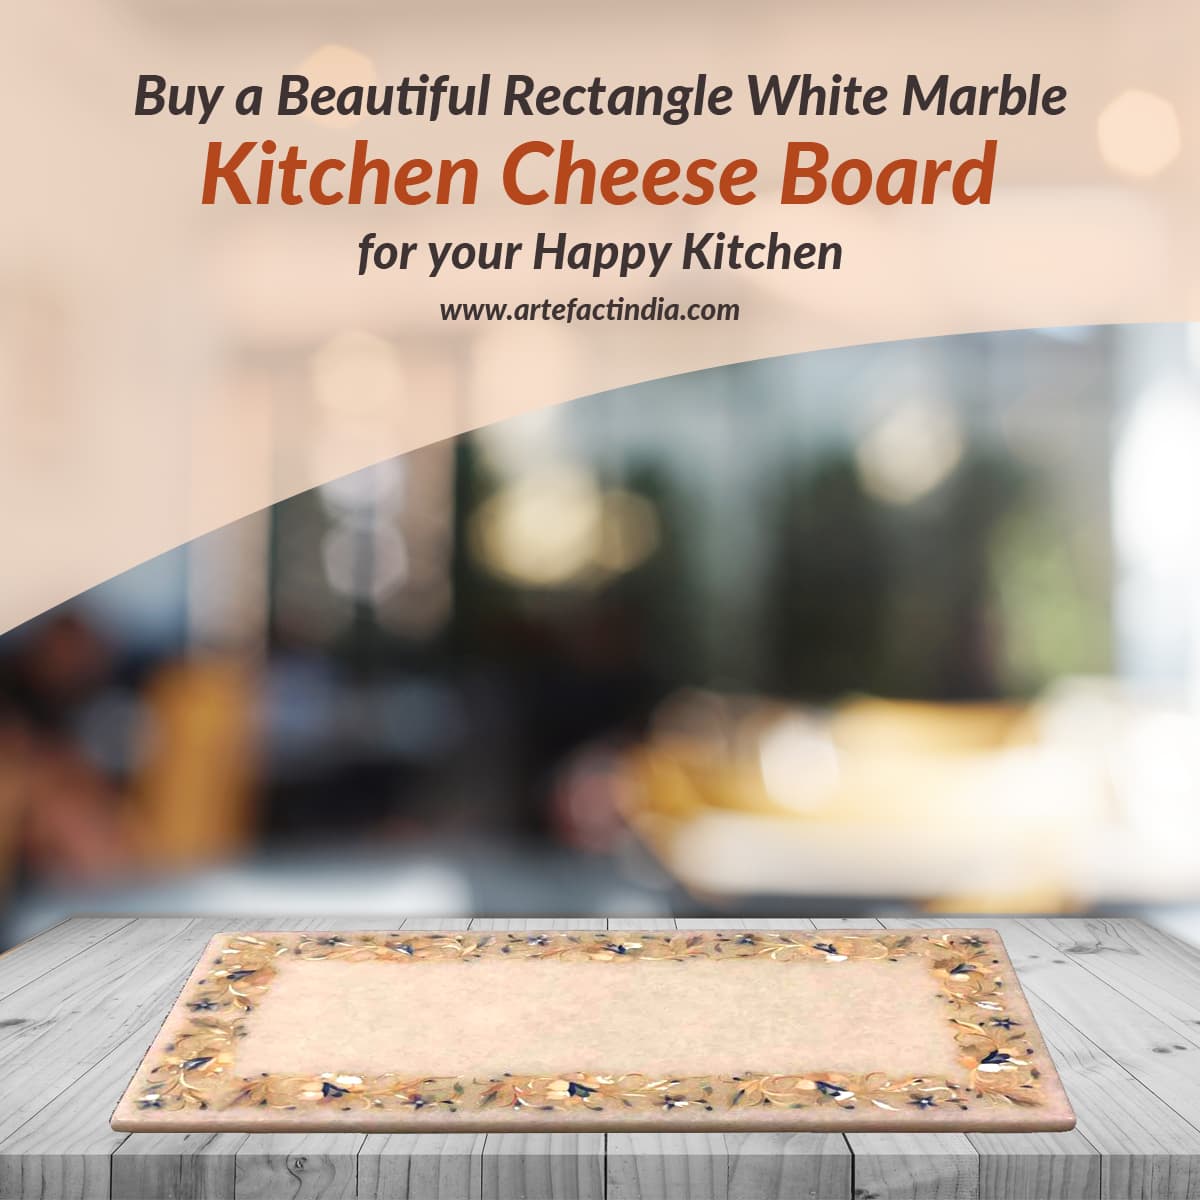 Buy a Beautiful Rectangle White Marble Kitchen Cheese Board for your Happy Kitchen